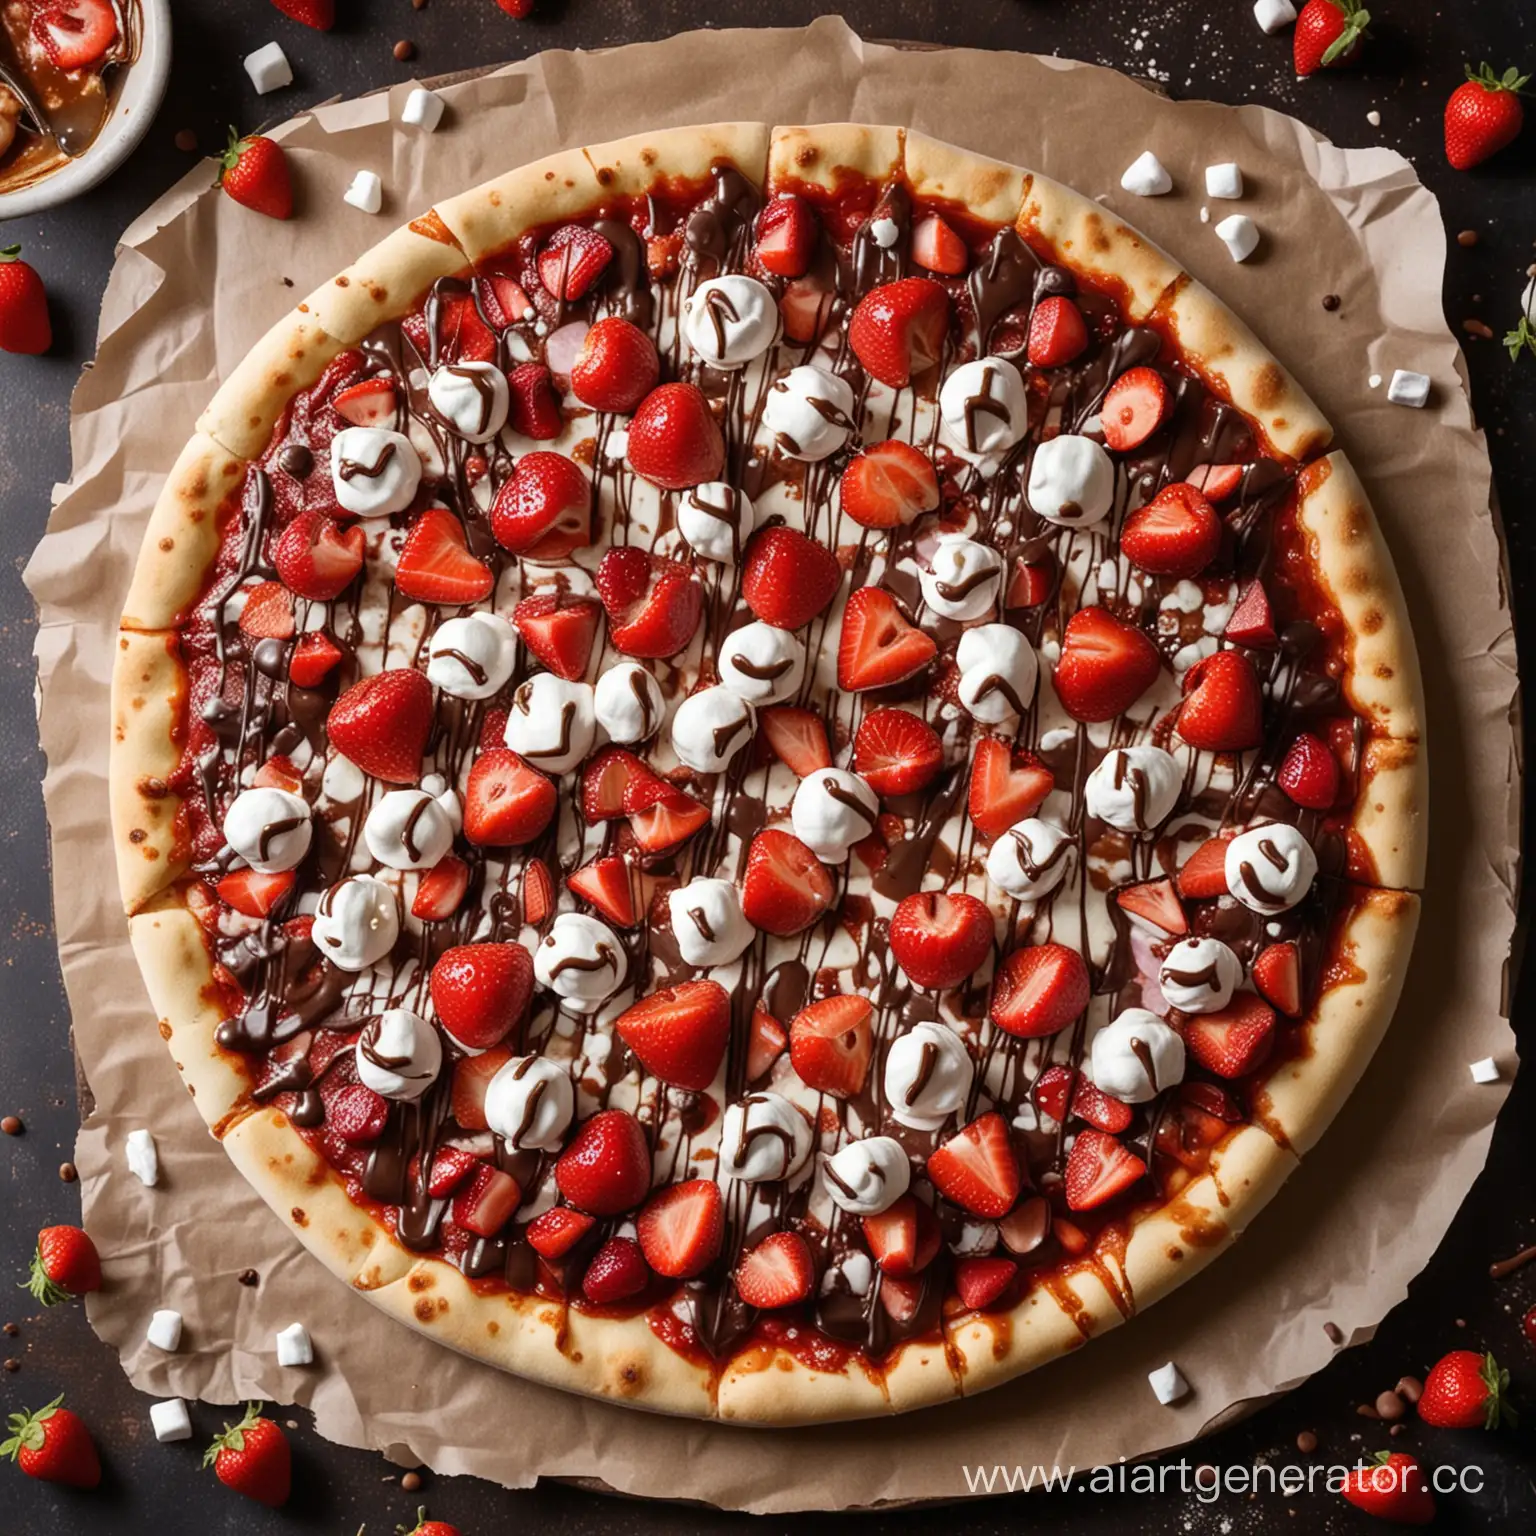 Strawberry-Topped-Pizza-with-Chocolate-Drizzle-and-Marshmallows